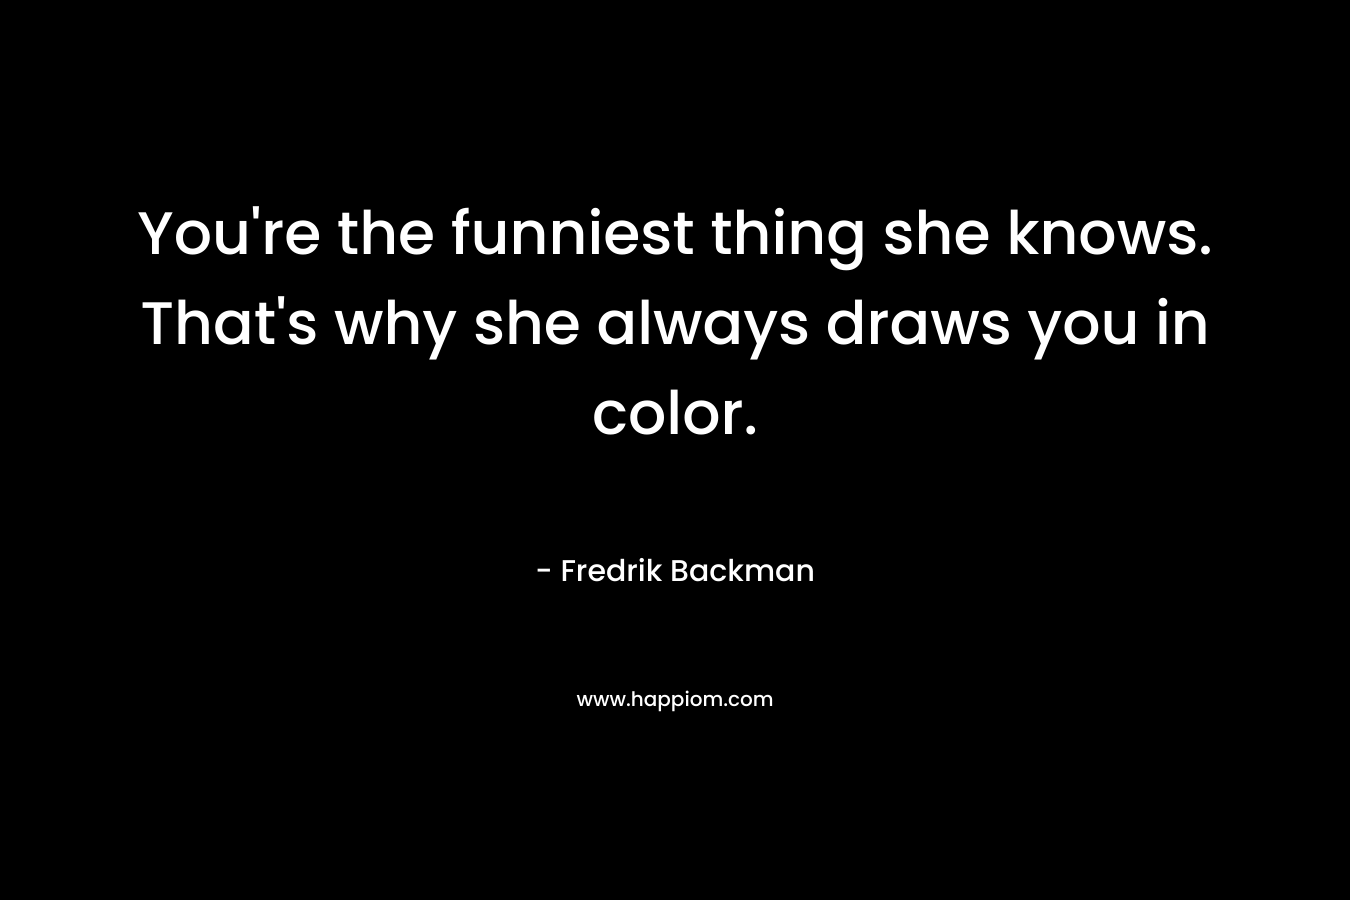 You're the funniest thing she knows. That's why she always draws you in color.